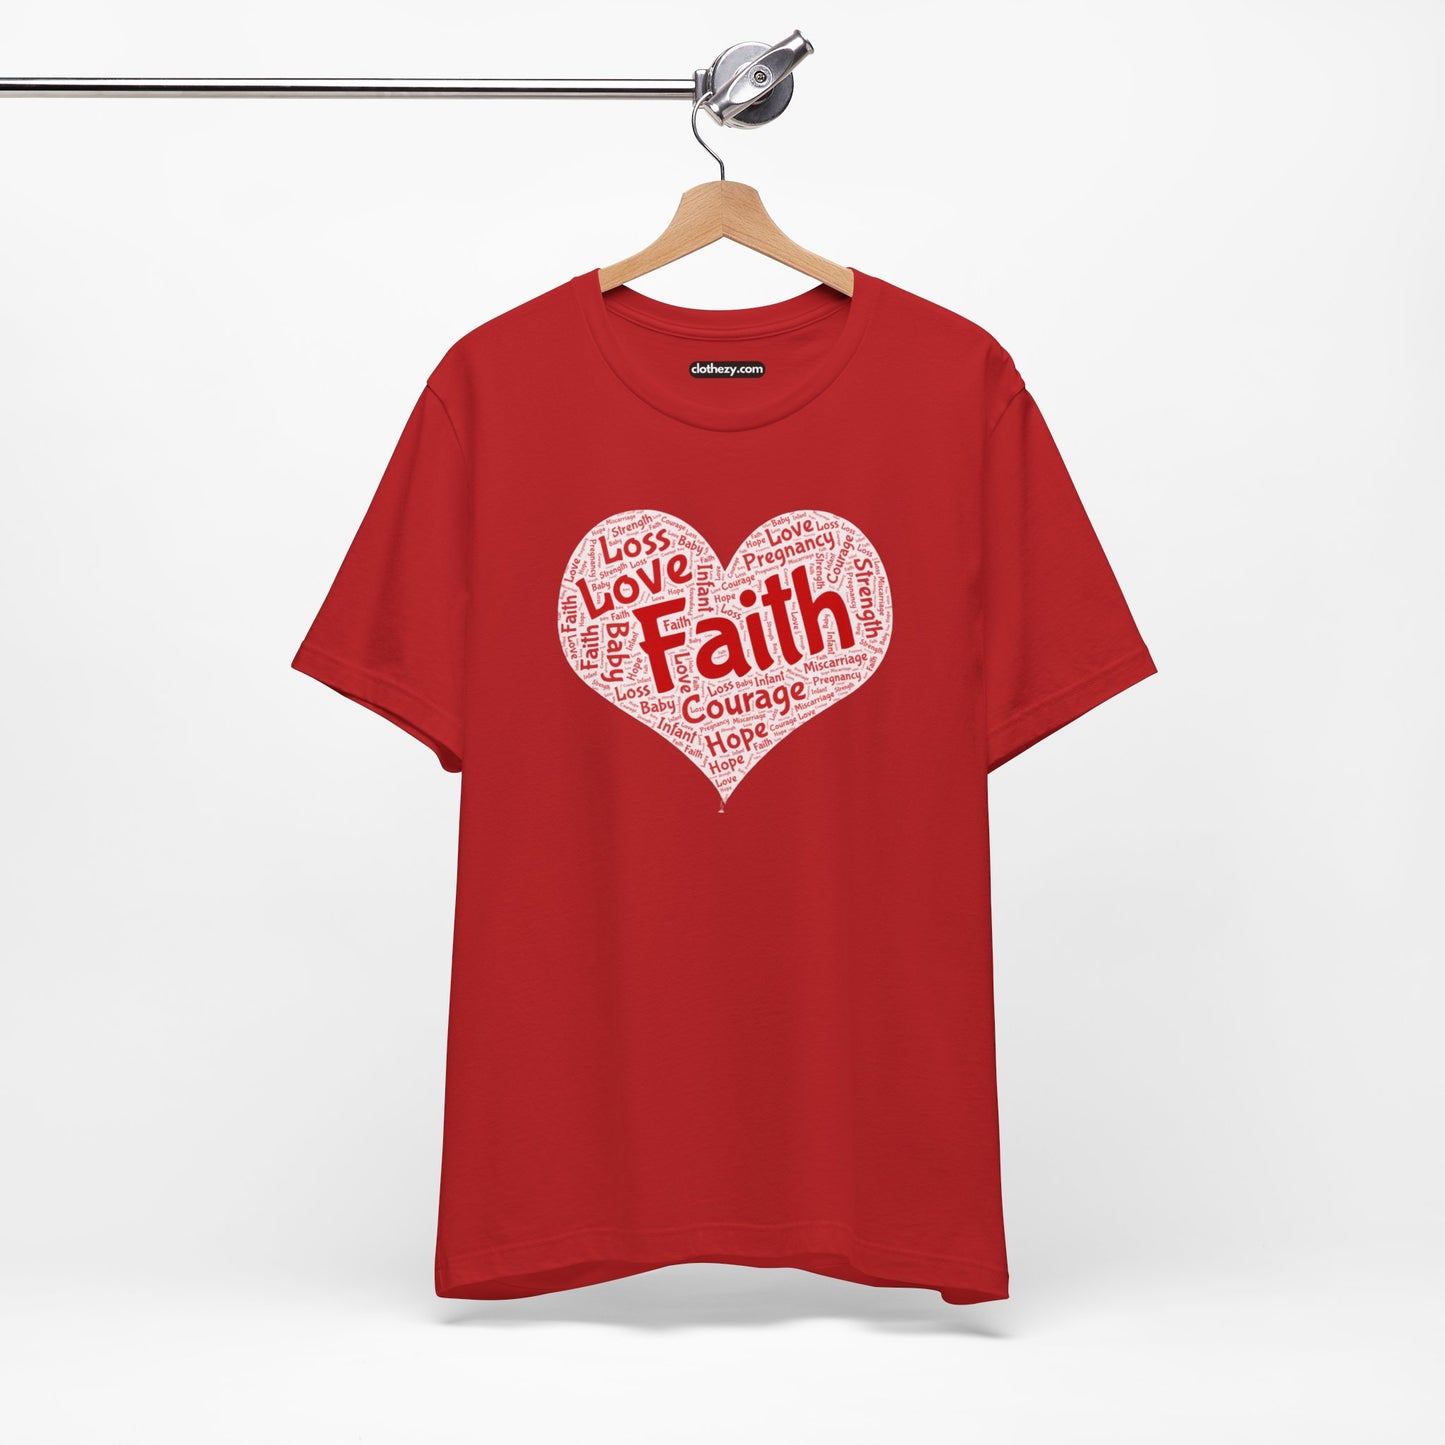 Word Cloud Heart for Miscarriage Support - Soft Cotton Adult Unisex T-Shirt, Gift for friends and family by clothezy.com - Buy Now